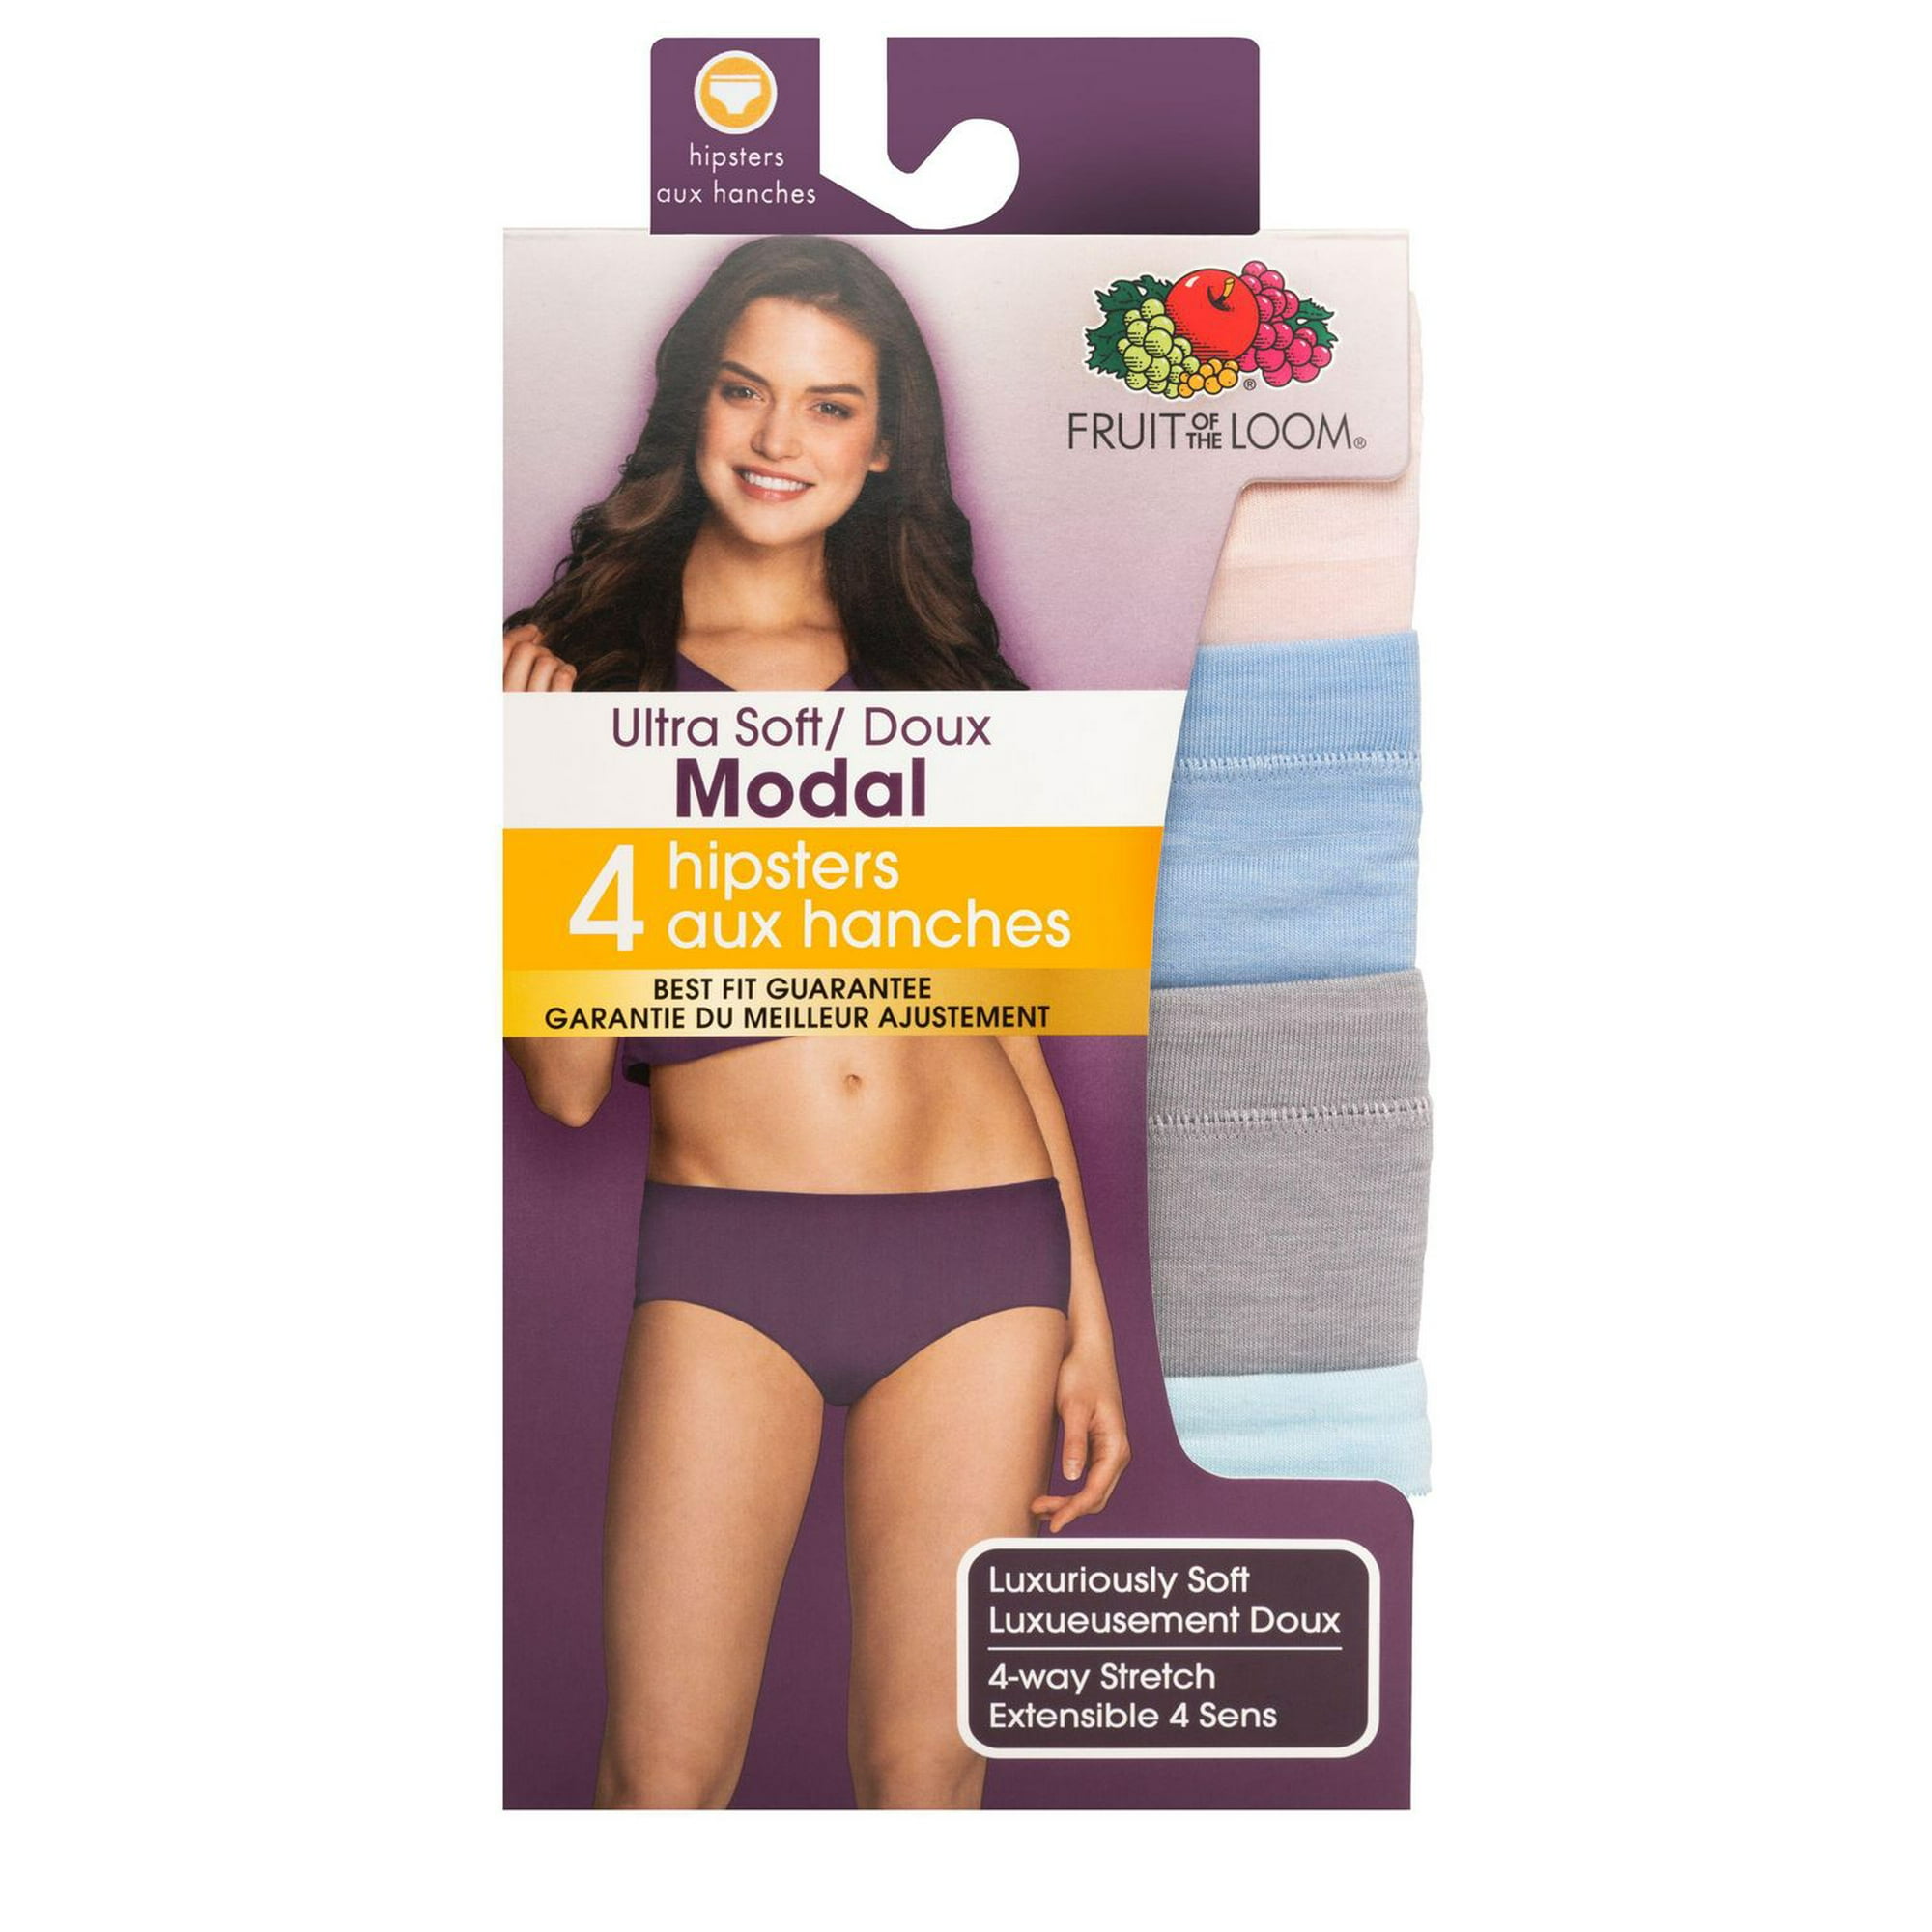 36 Pieces Fruit Of The Loom 12 Pack Hipster Cut Underwear Size 12